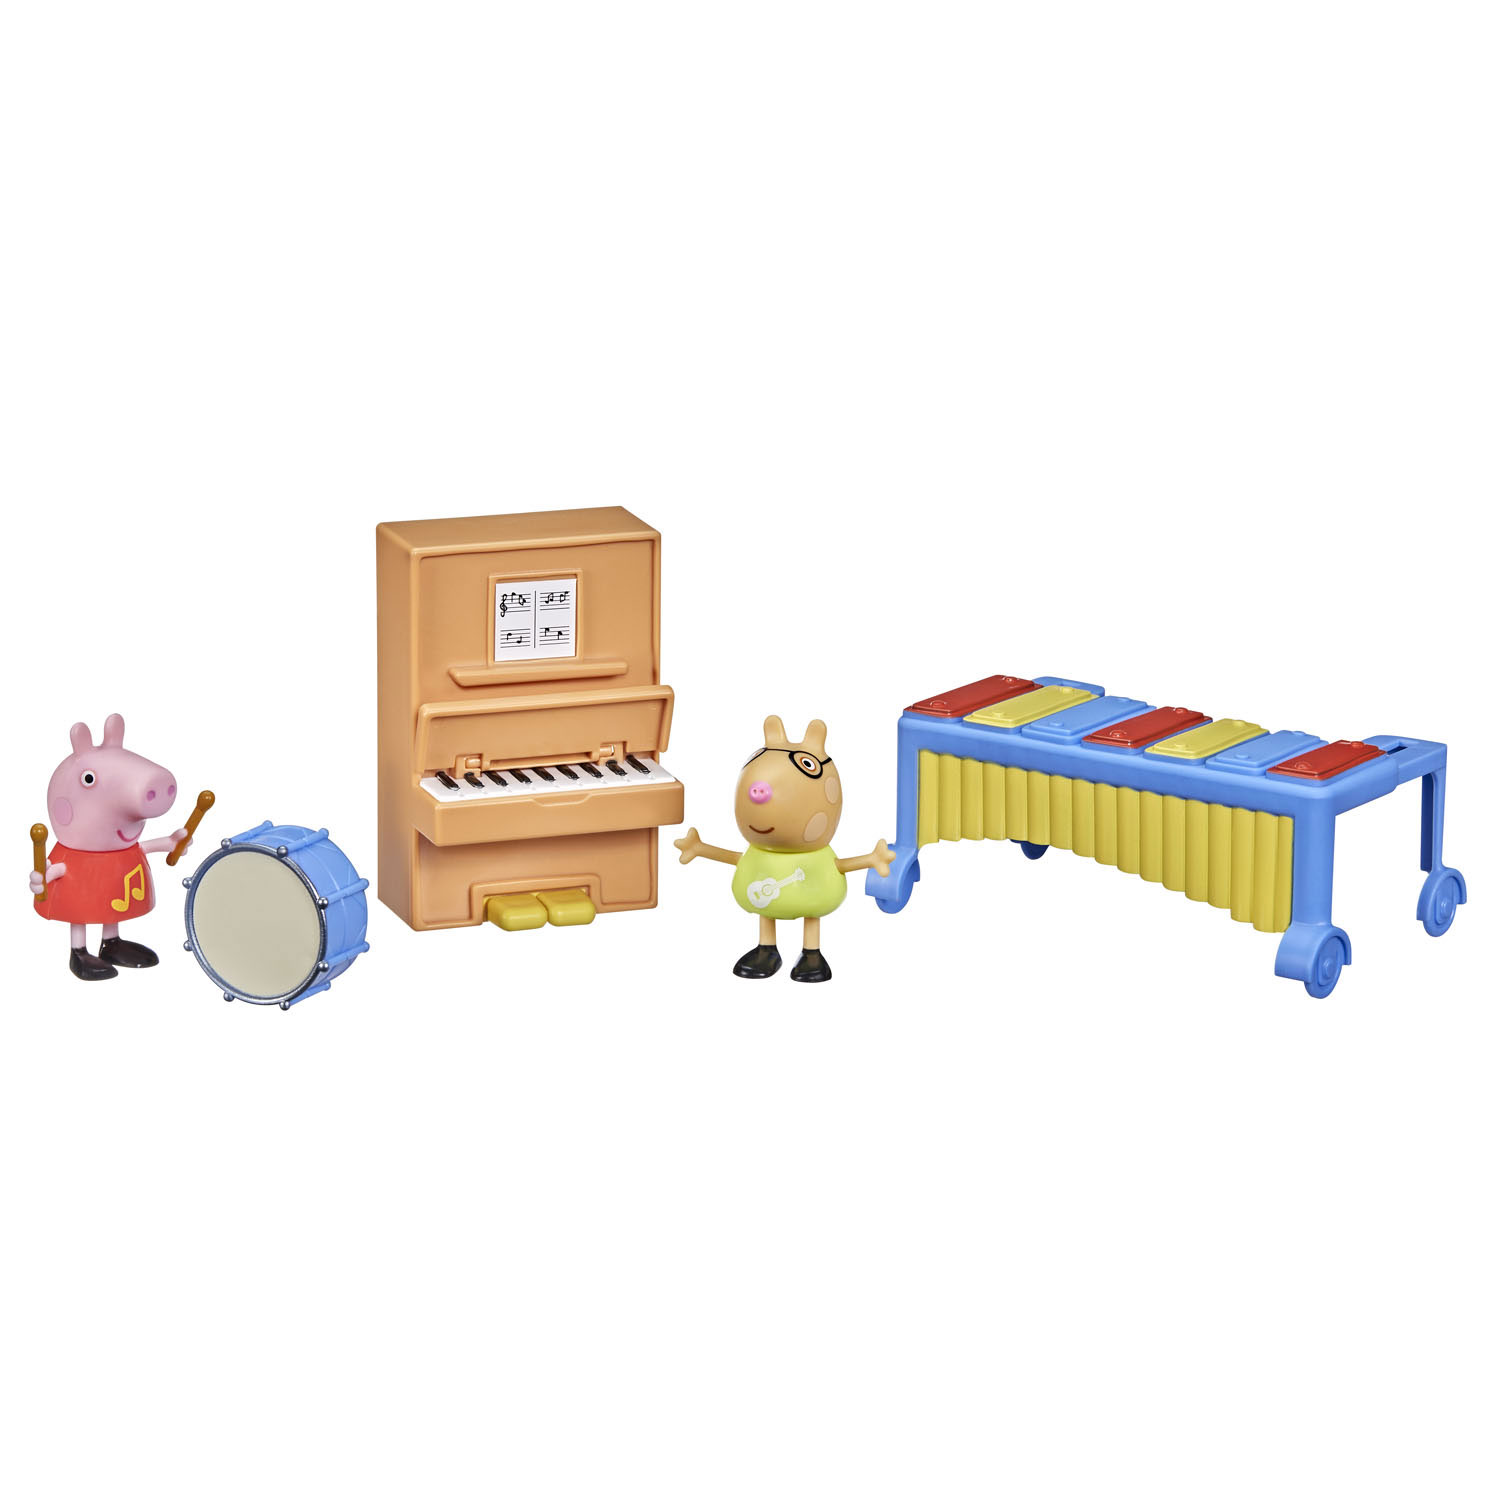 Hasbro Peppa Pig Playset Musique d'extension